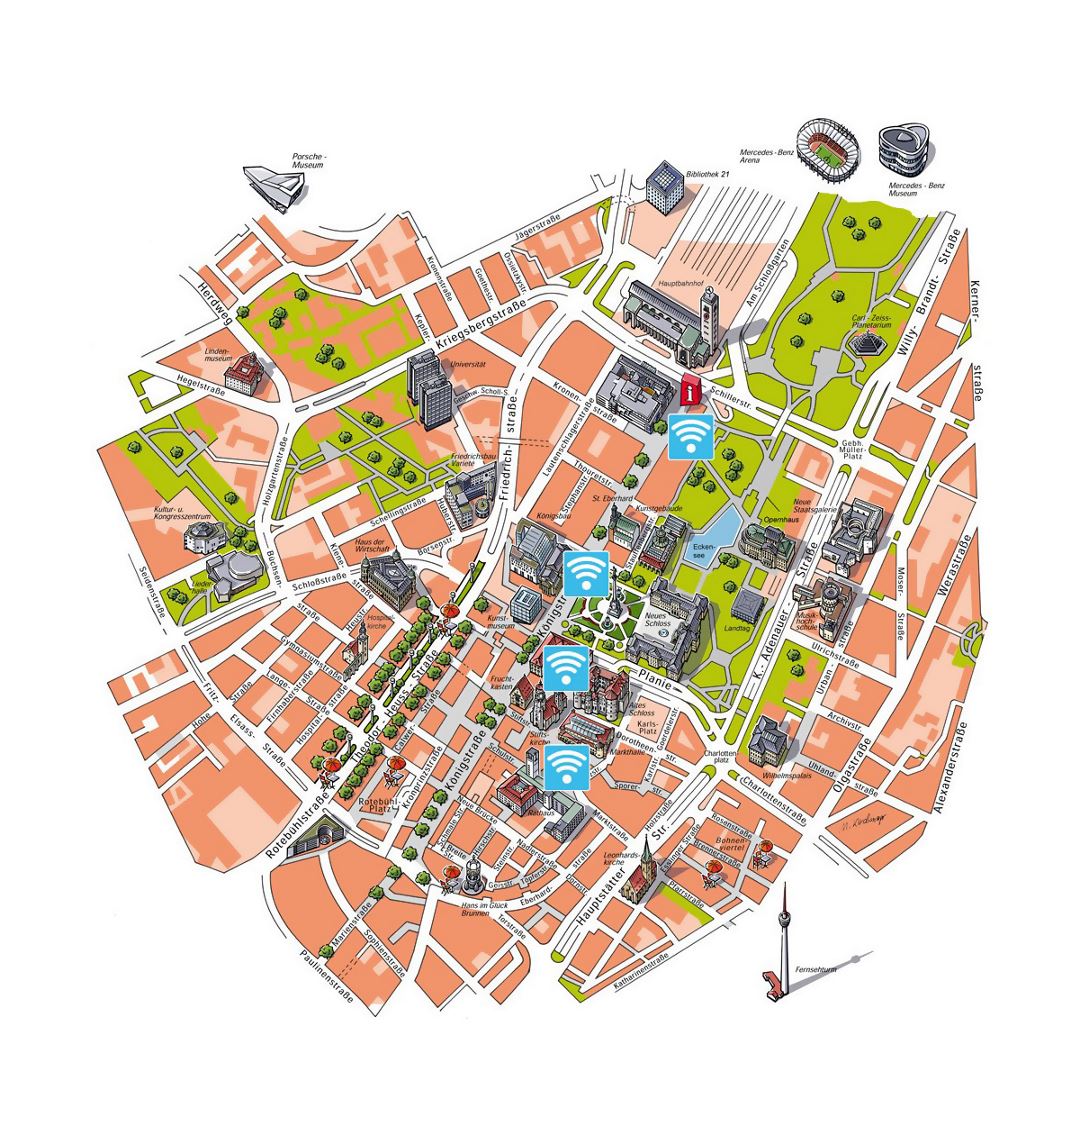 Detailed free WiFi map of central part of Stuttgart city